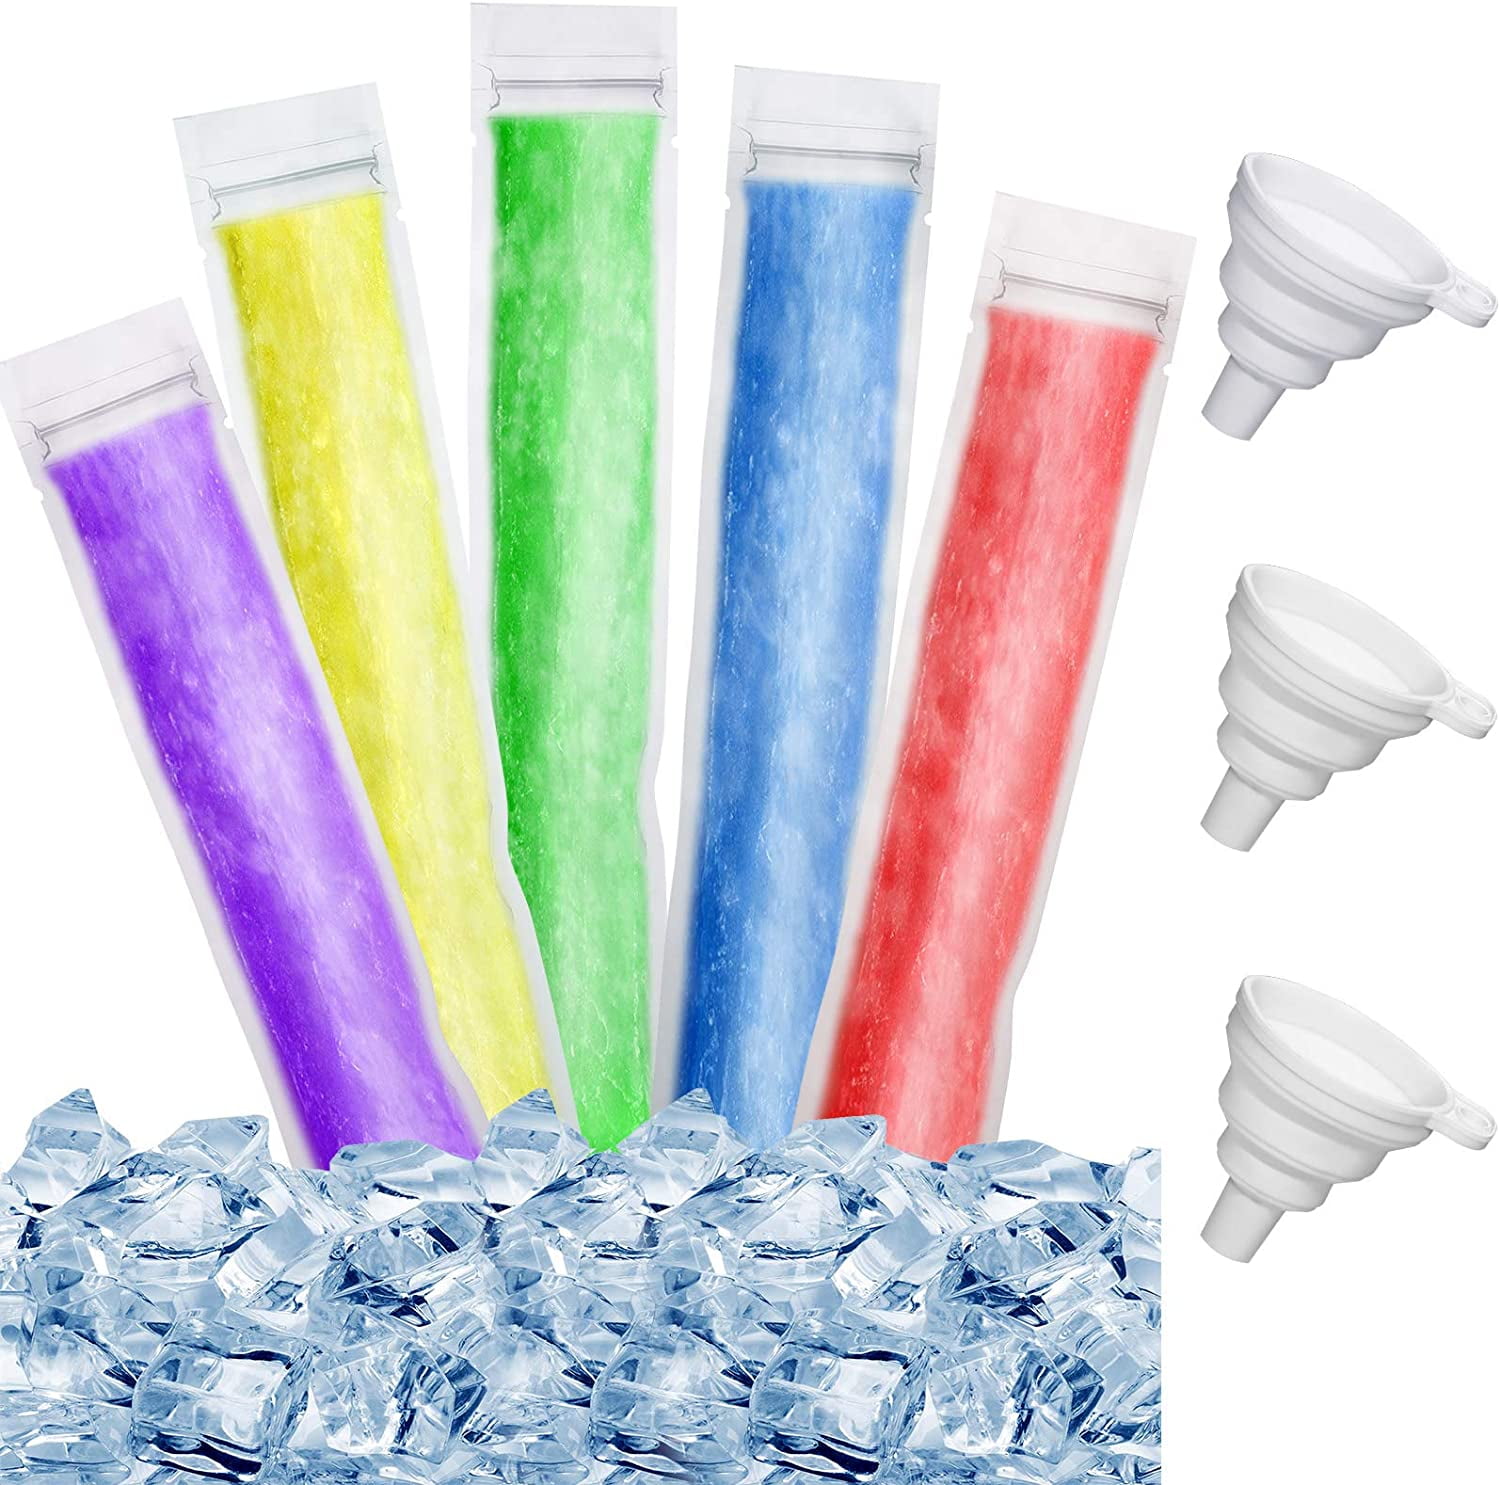 Ice Popsicle Moulds Bags With A Funnel For Yogurt Ice Candy Or Freeze Pops  Ice Cream Party Favors100 Pack  Fruugo IN